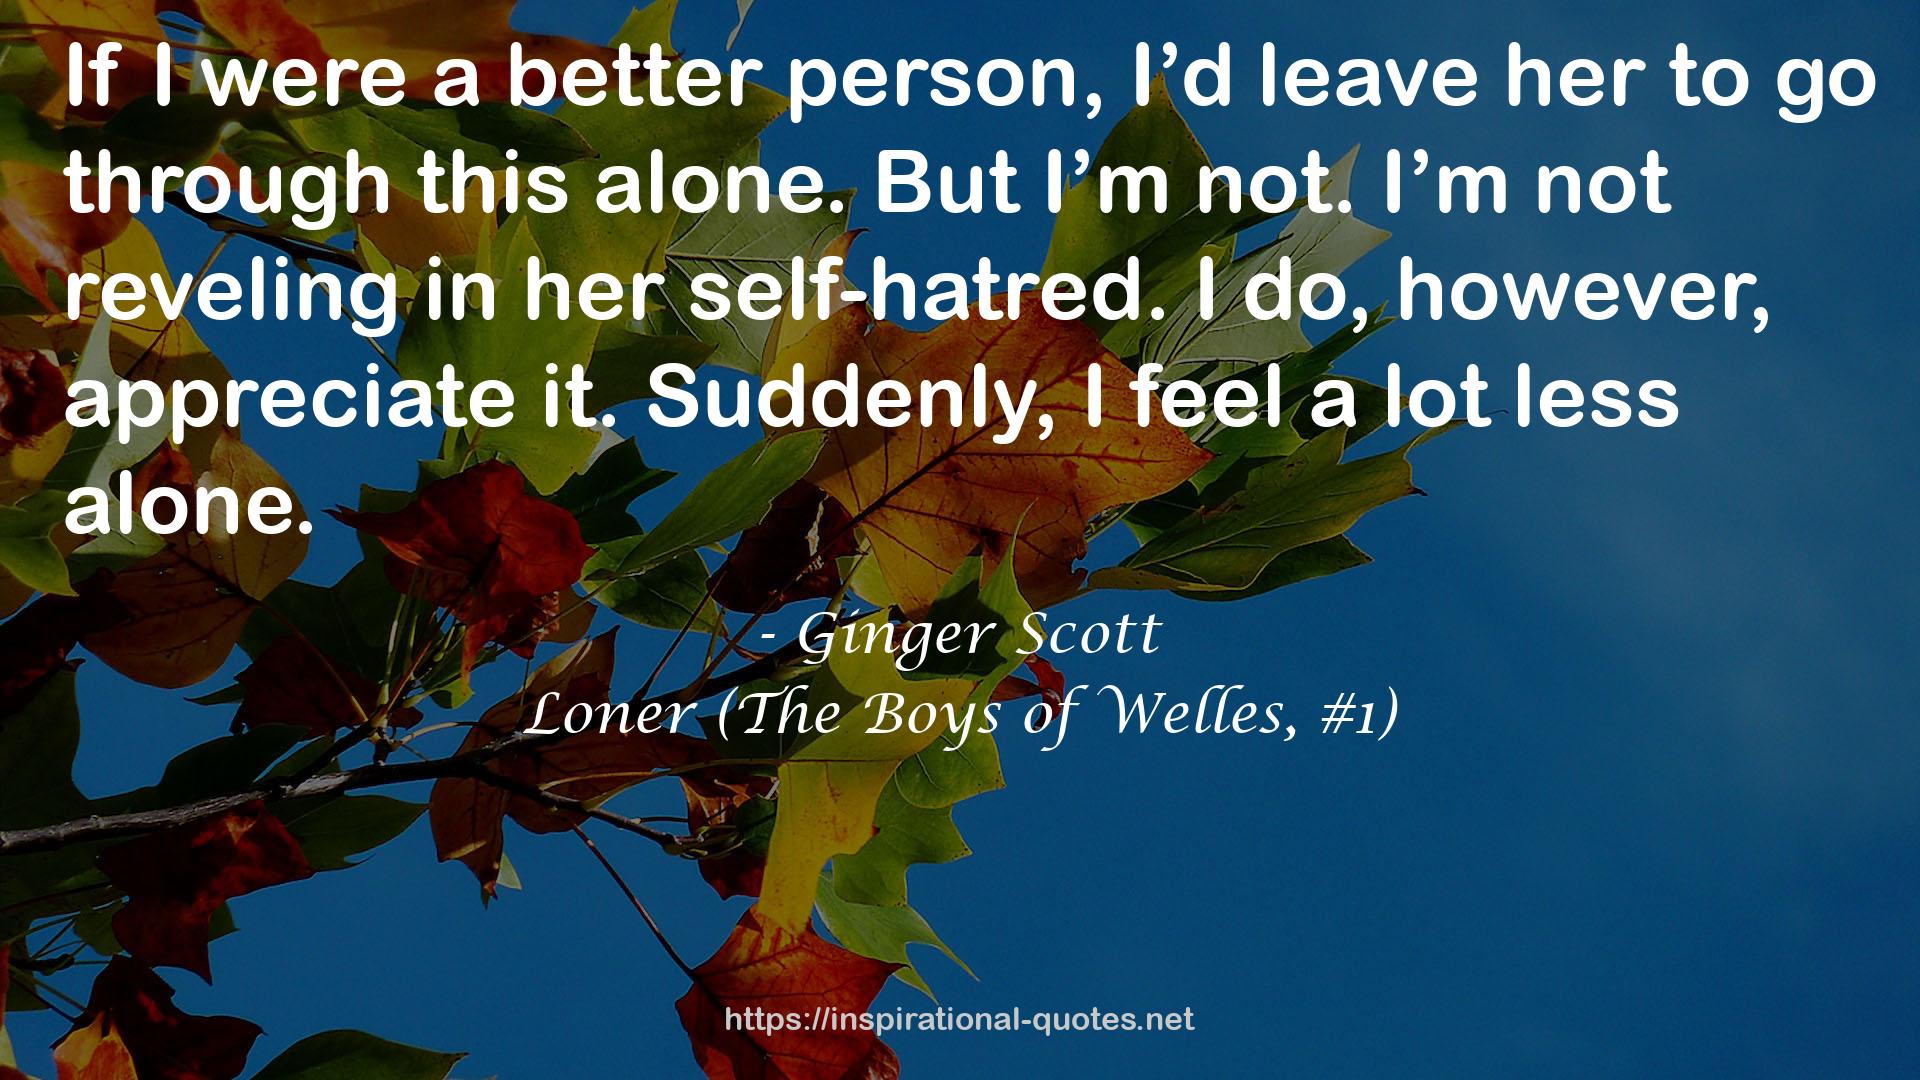 Loner (The Boys of Welles, #1) QUOTES